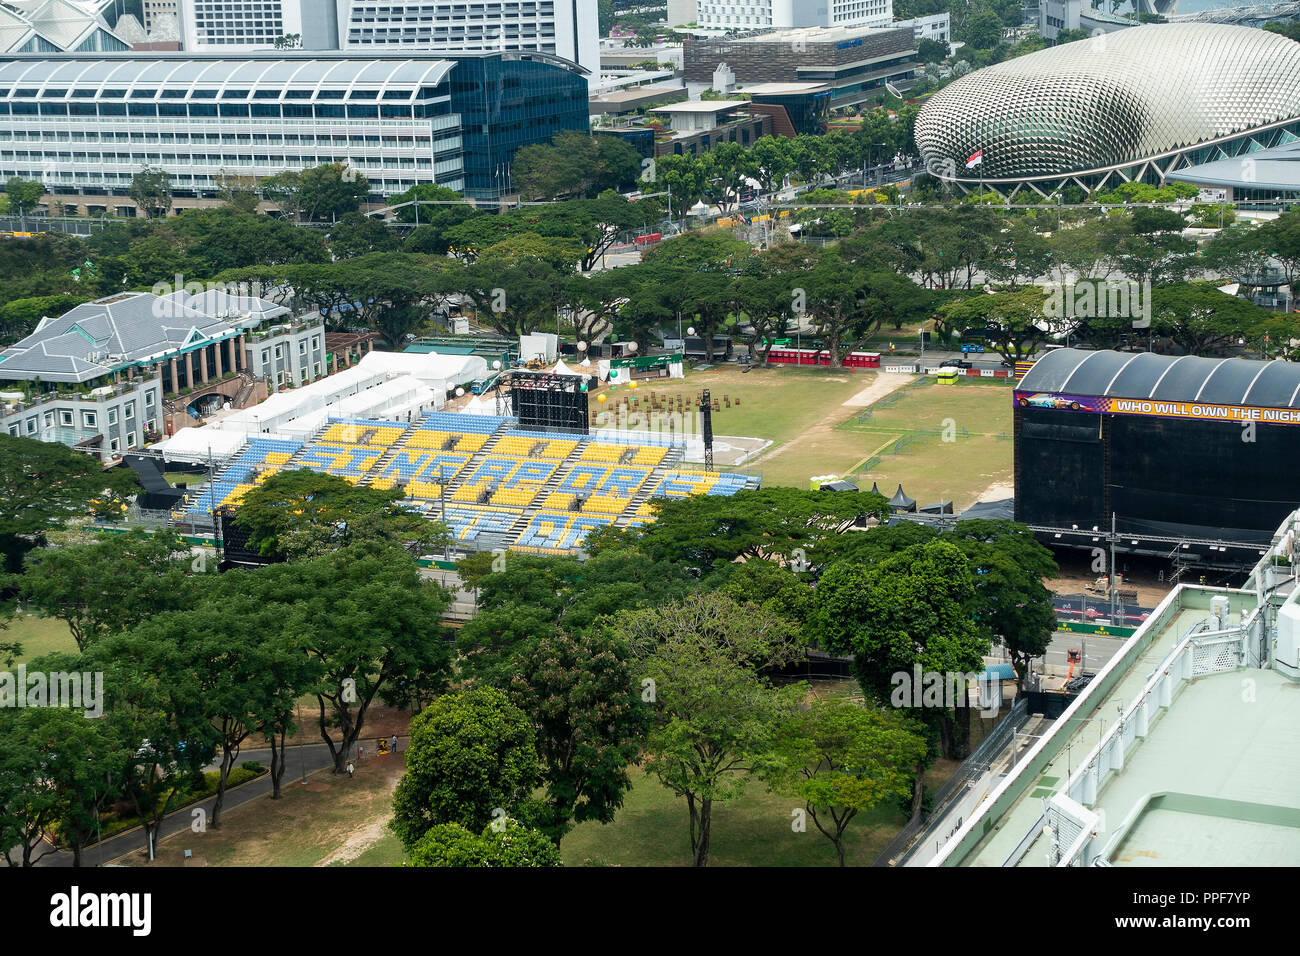 The Recreation Club with Marquees with Formula One Grandstand and Theatre Stage on the Padang with Esplanade Theatre in Republic of Singapore Asia Stock Photo